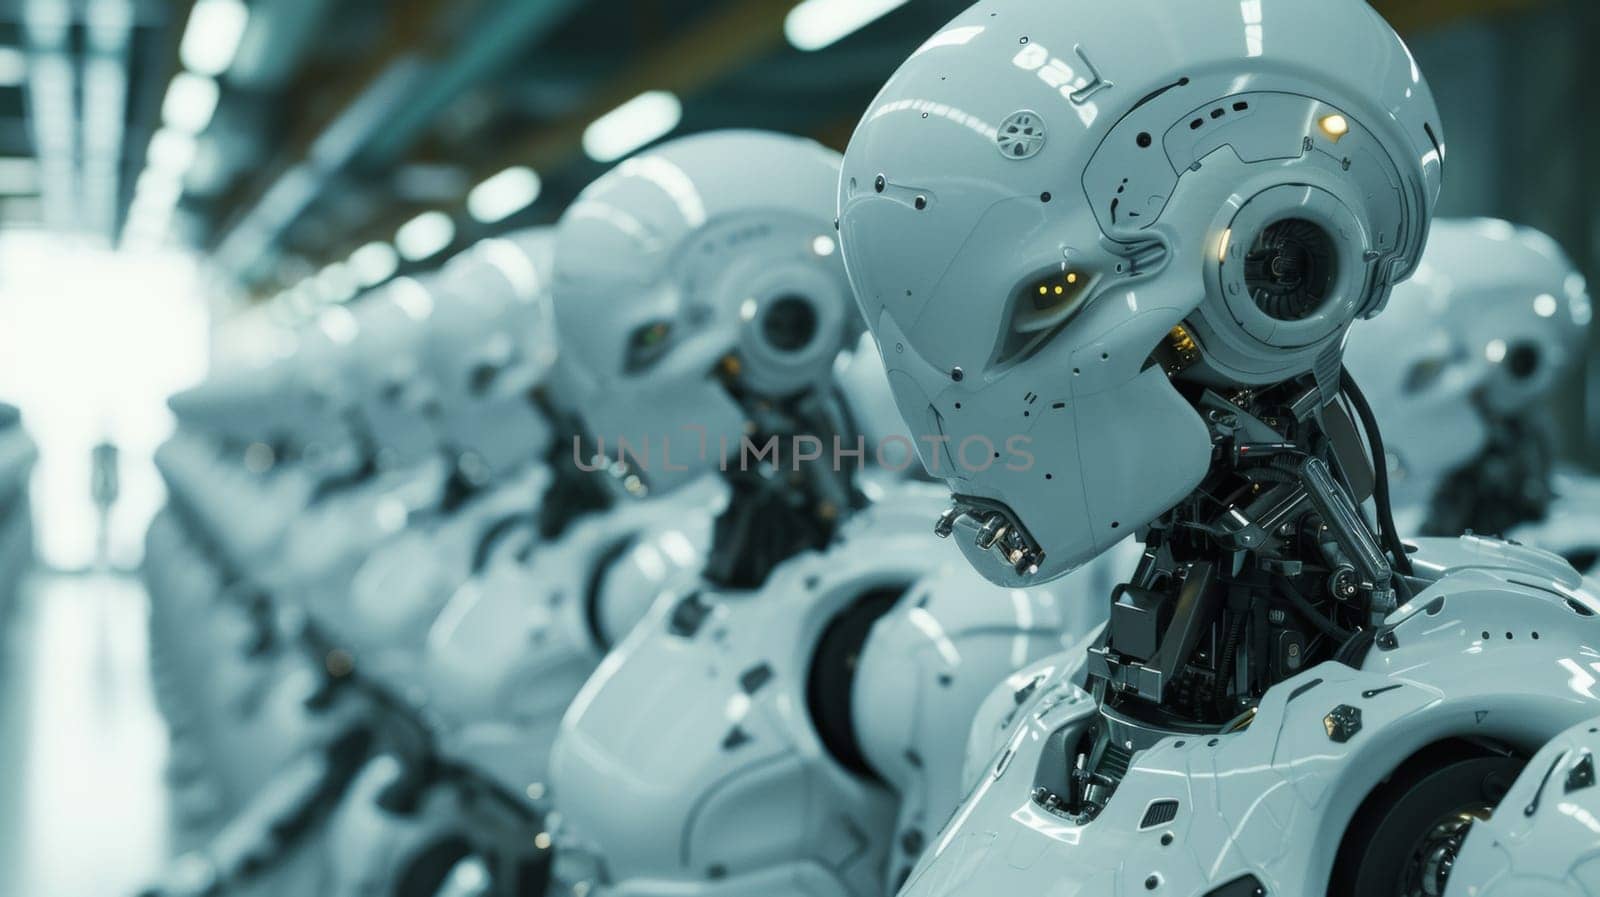 A row of robots lined up in a warehouse with white lights, AI by starush